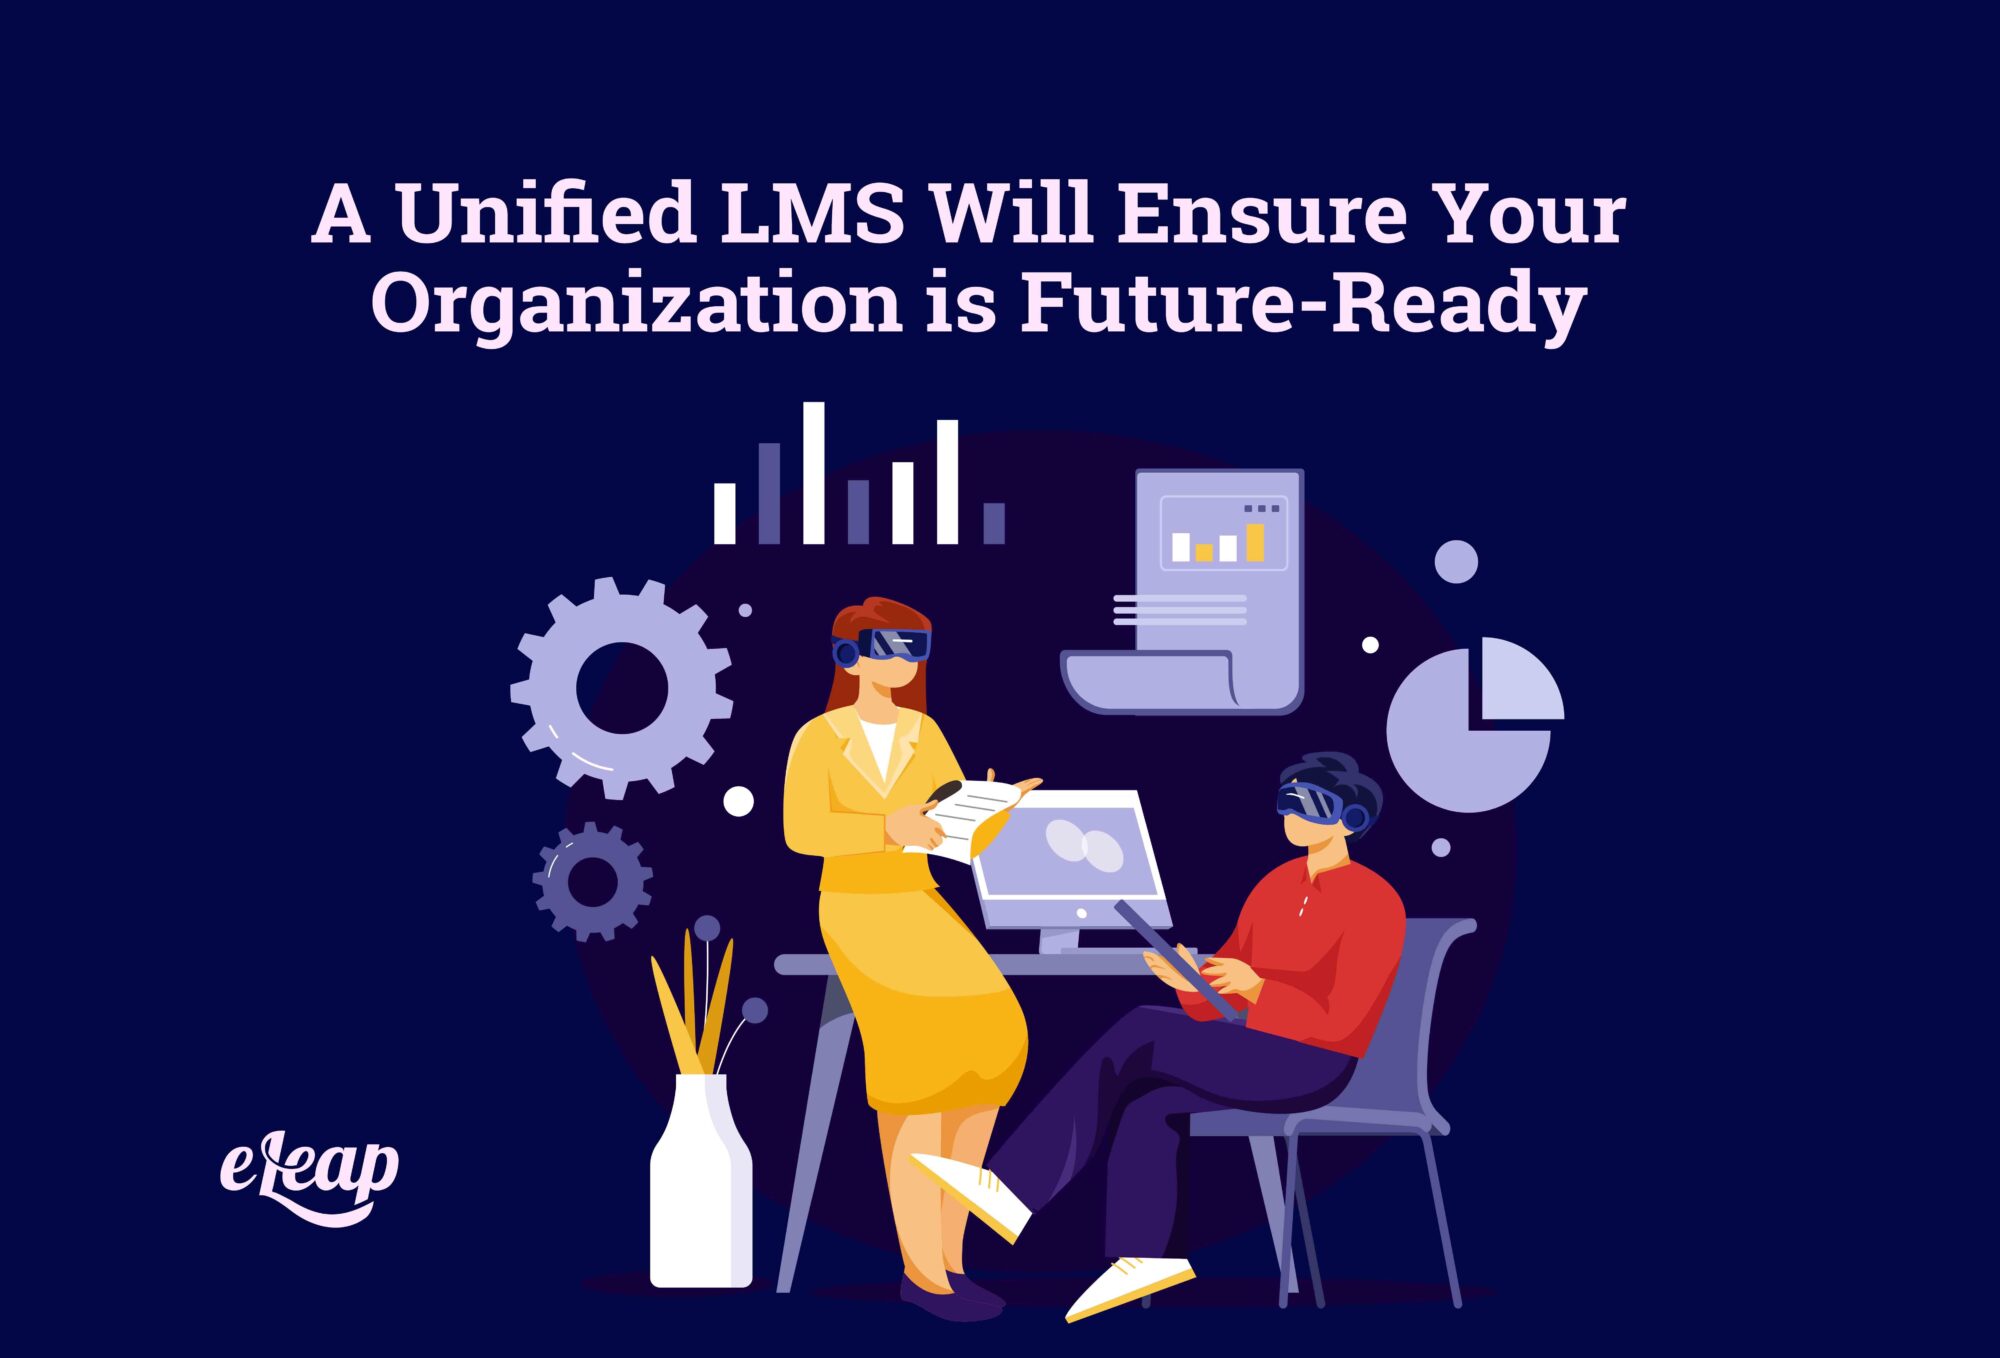 A Unified LMS Will Ensure Your Organization is Future-Ready